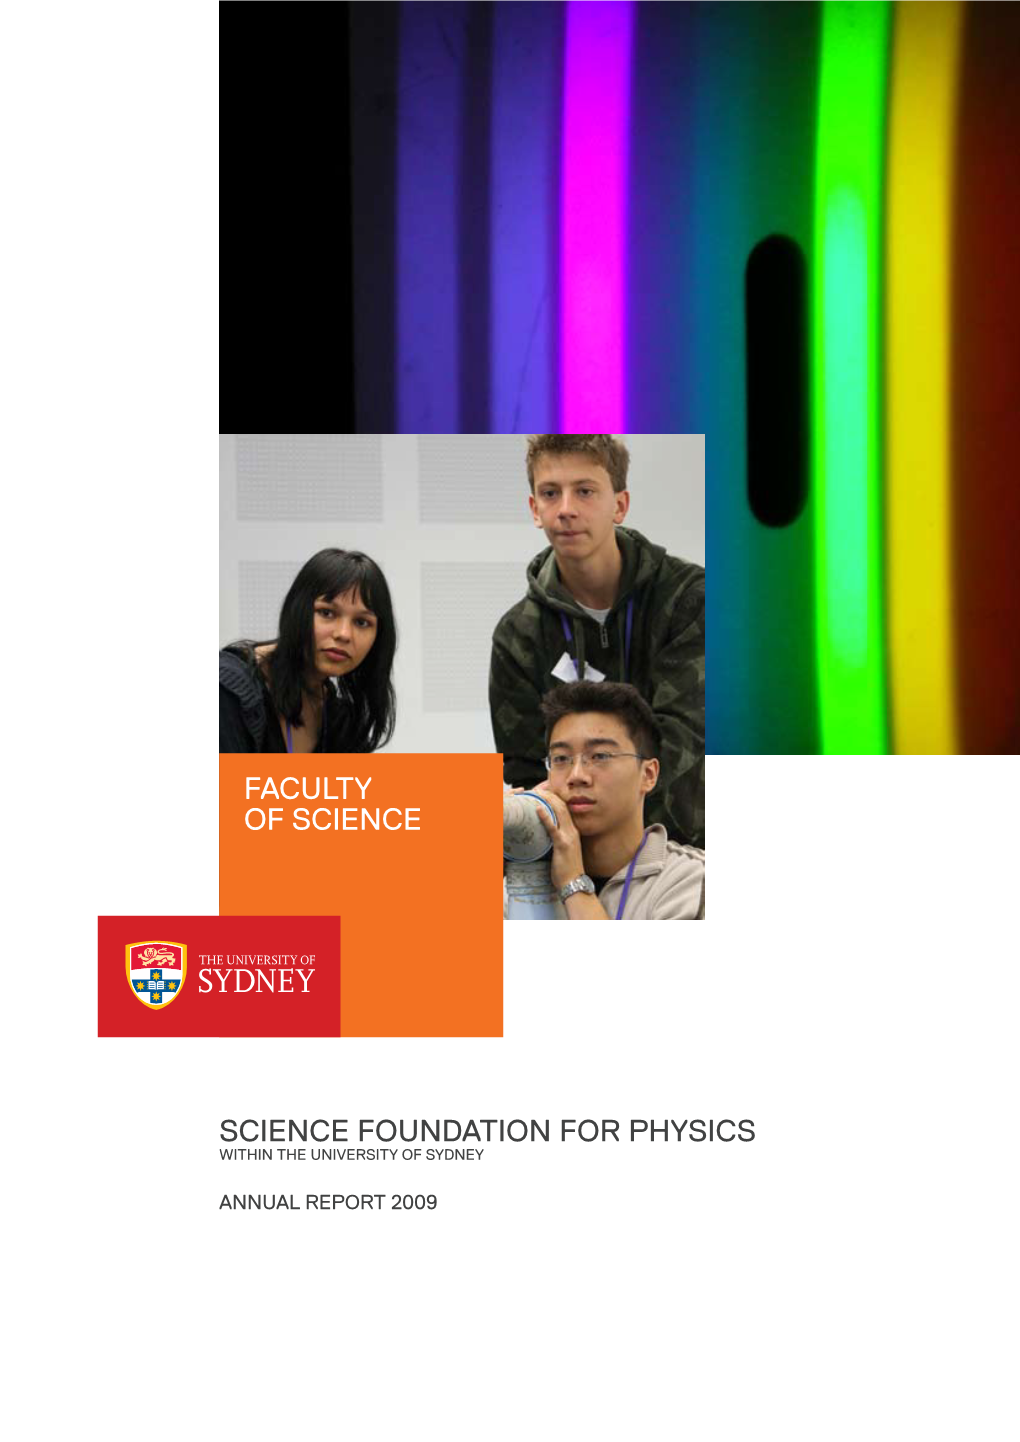 Science Foundation for Physics Within the University of Sydney